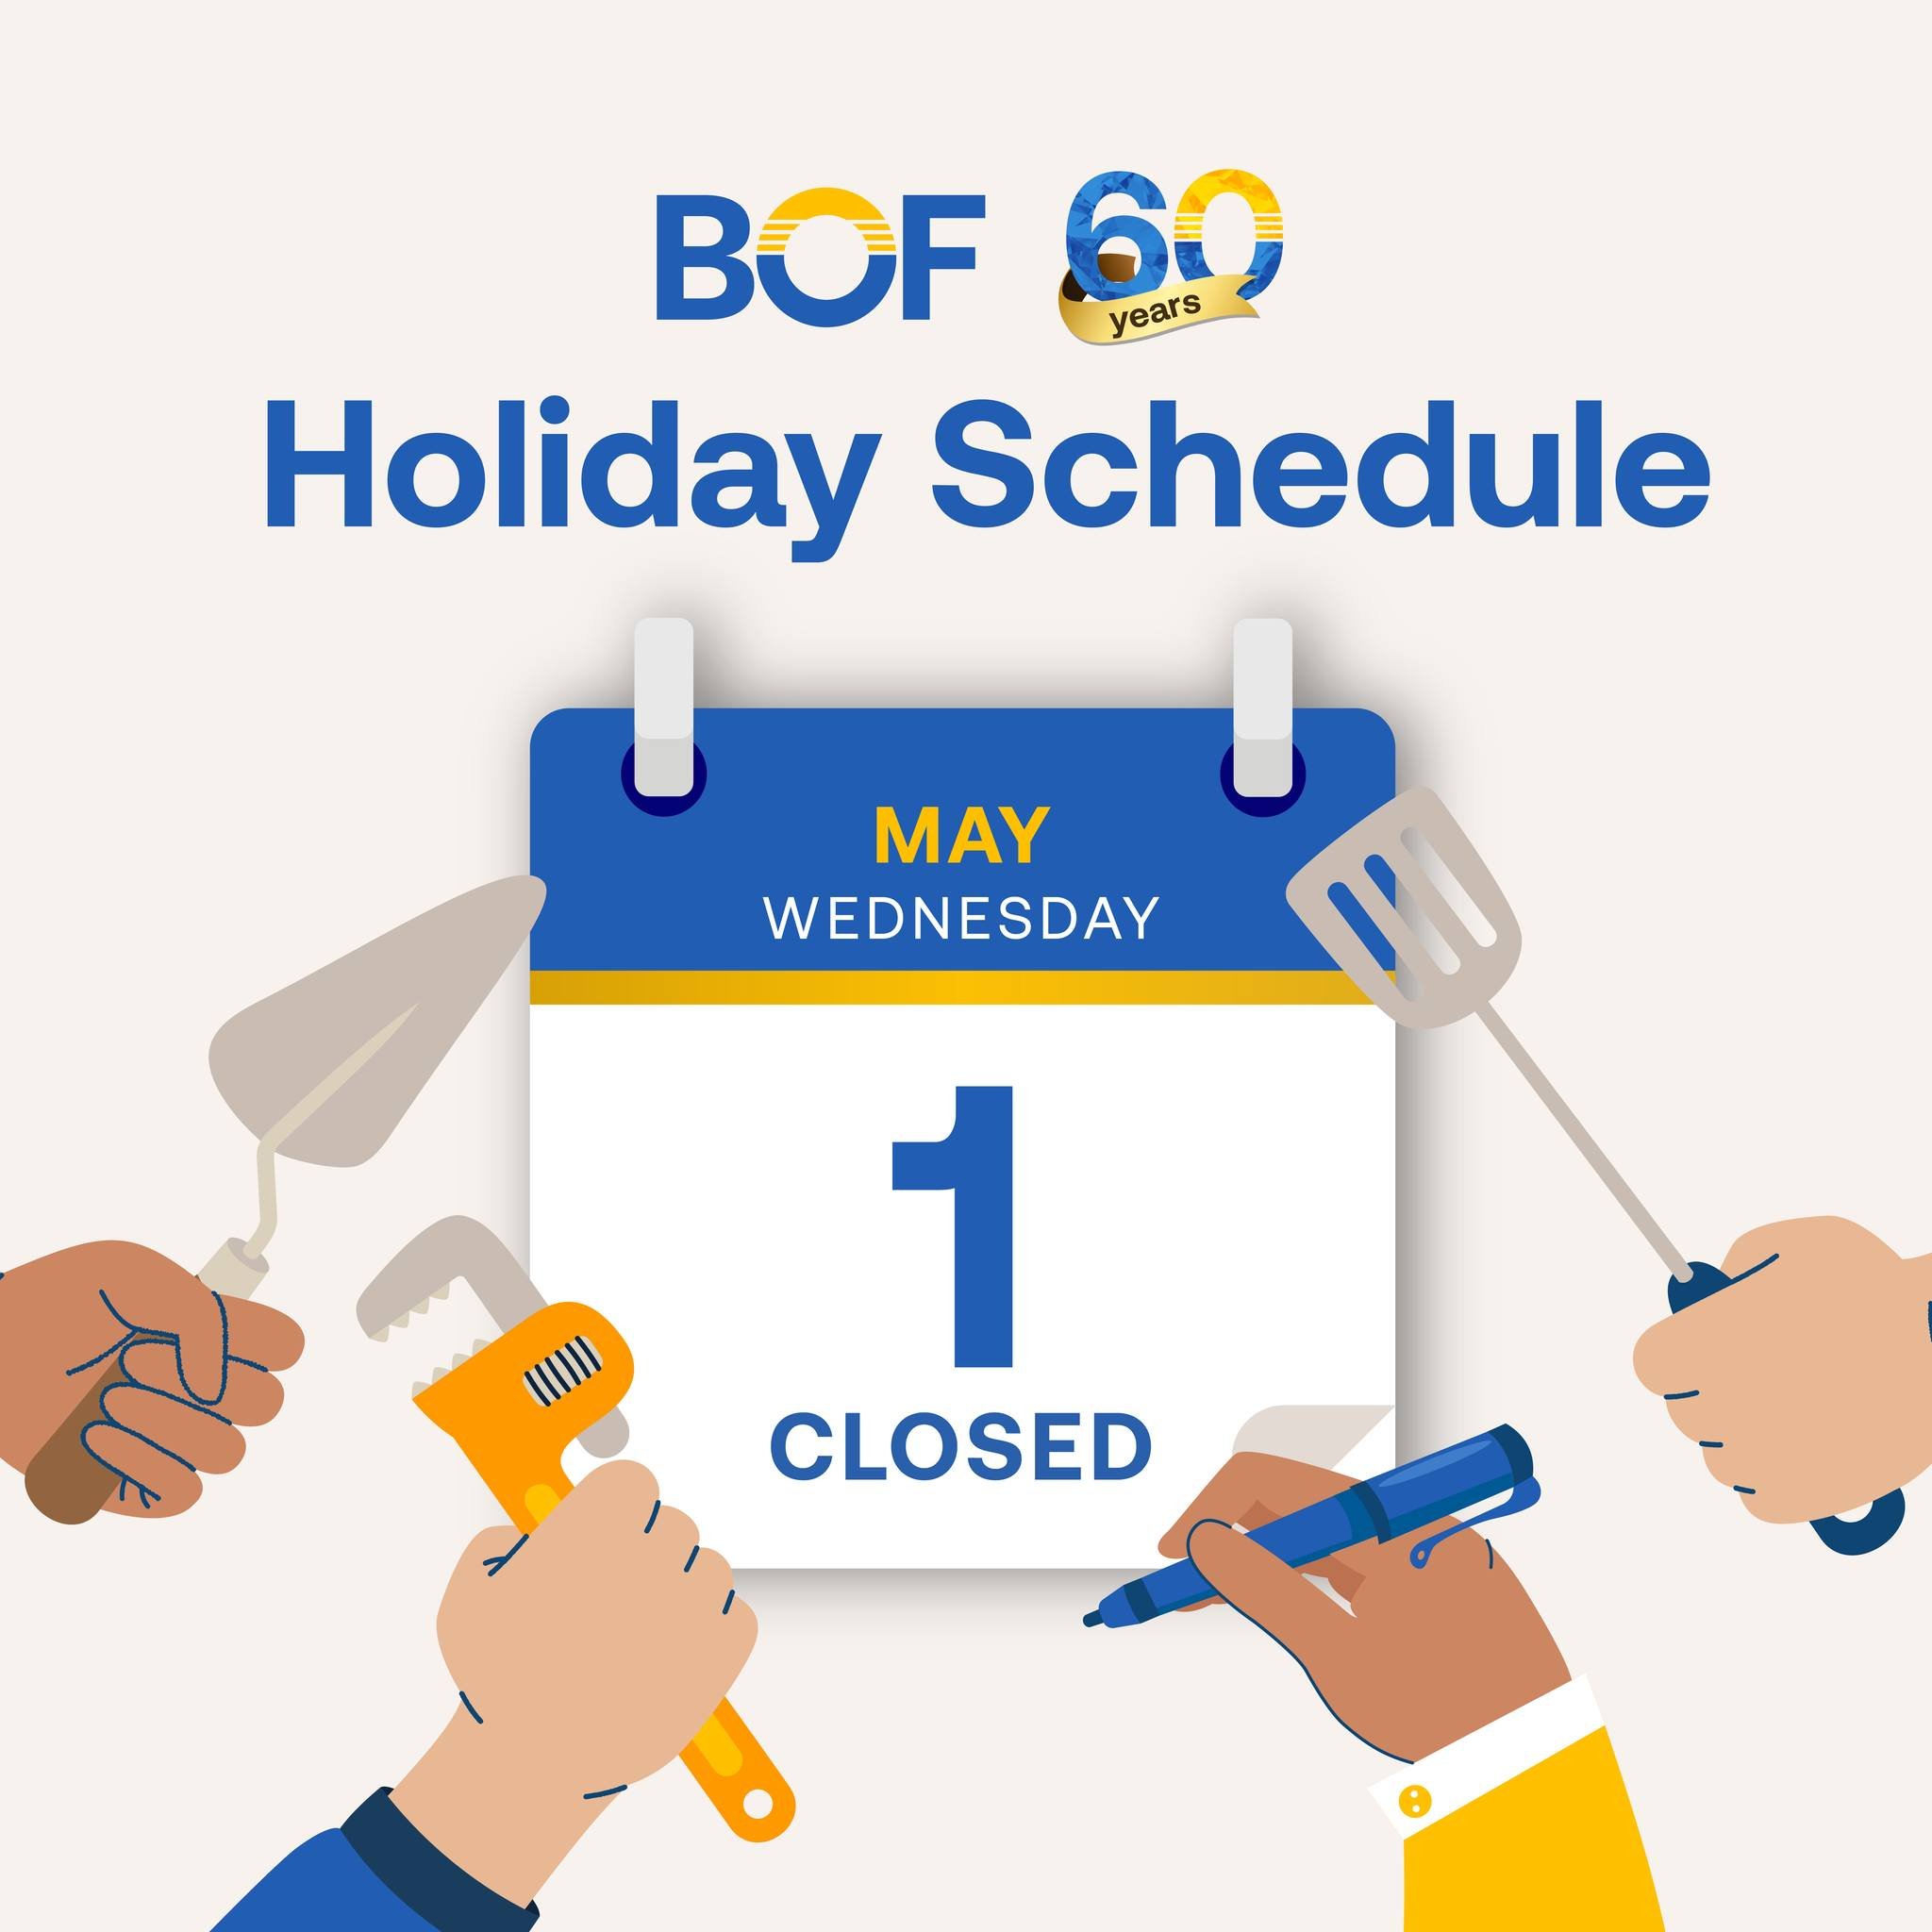 #BankAdvisory

Please be informed that all BOF branches will be closed tomorrow, May 1, 2024 (Wednesday) in observance of Labor Day. Regular banking hours will resume on May 2, 2024 (Thursday).

Please plan your transactions accordingly.

#BOF

BOF, 